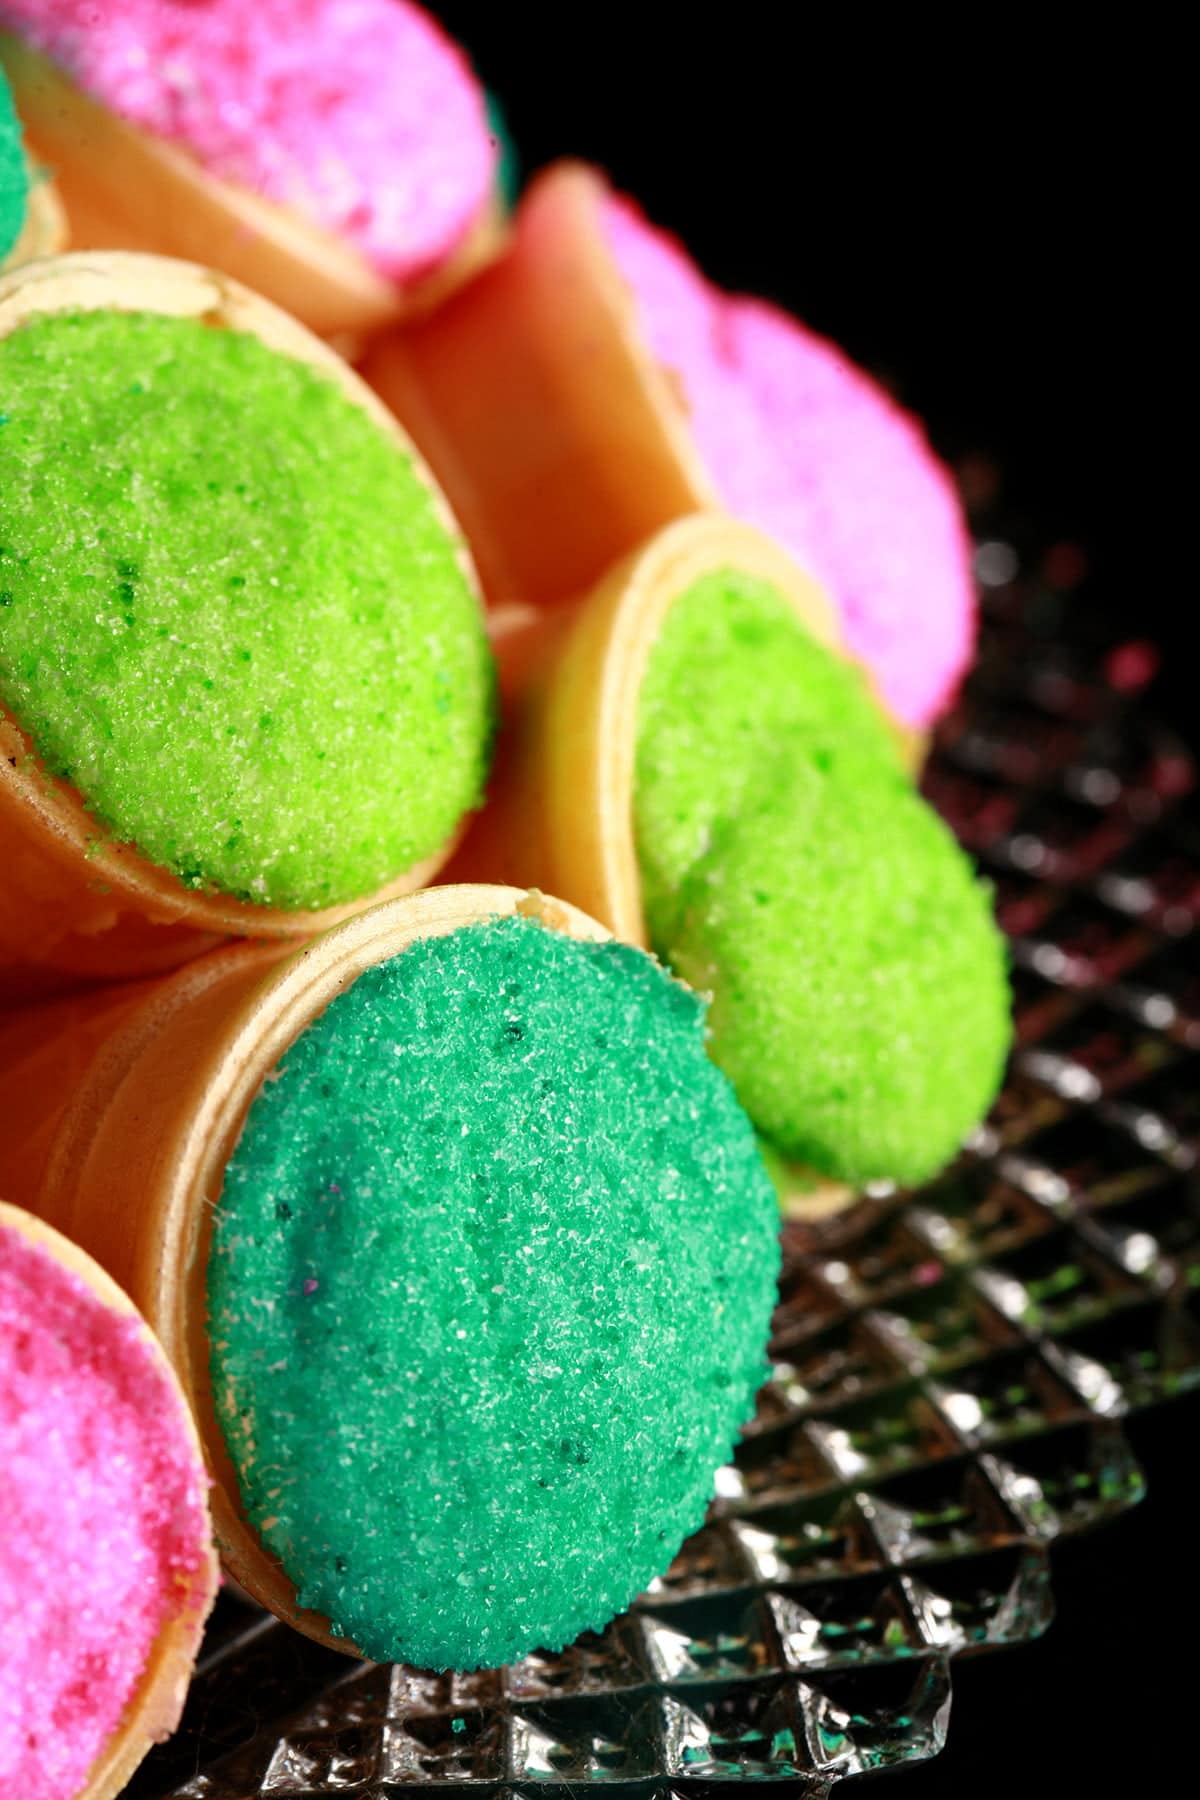 A pile of marshmallow cones - mini ice cream cones filled with marshmallow - are arranged on a plate. The exposed marshmallow of each is coated in colourful sugar - hot pink, lime green, and teal.